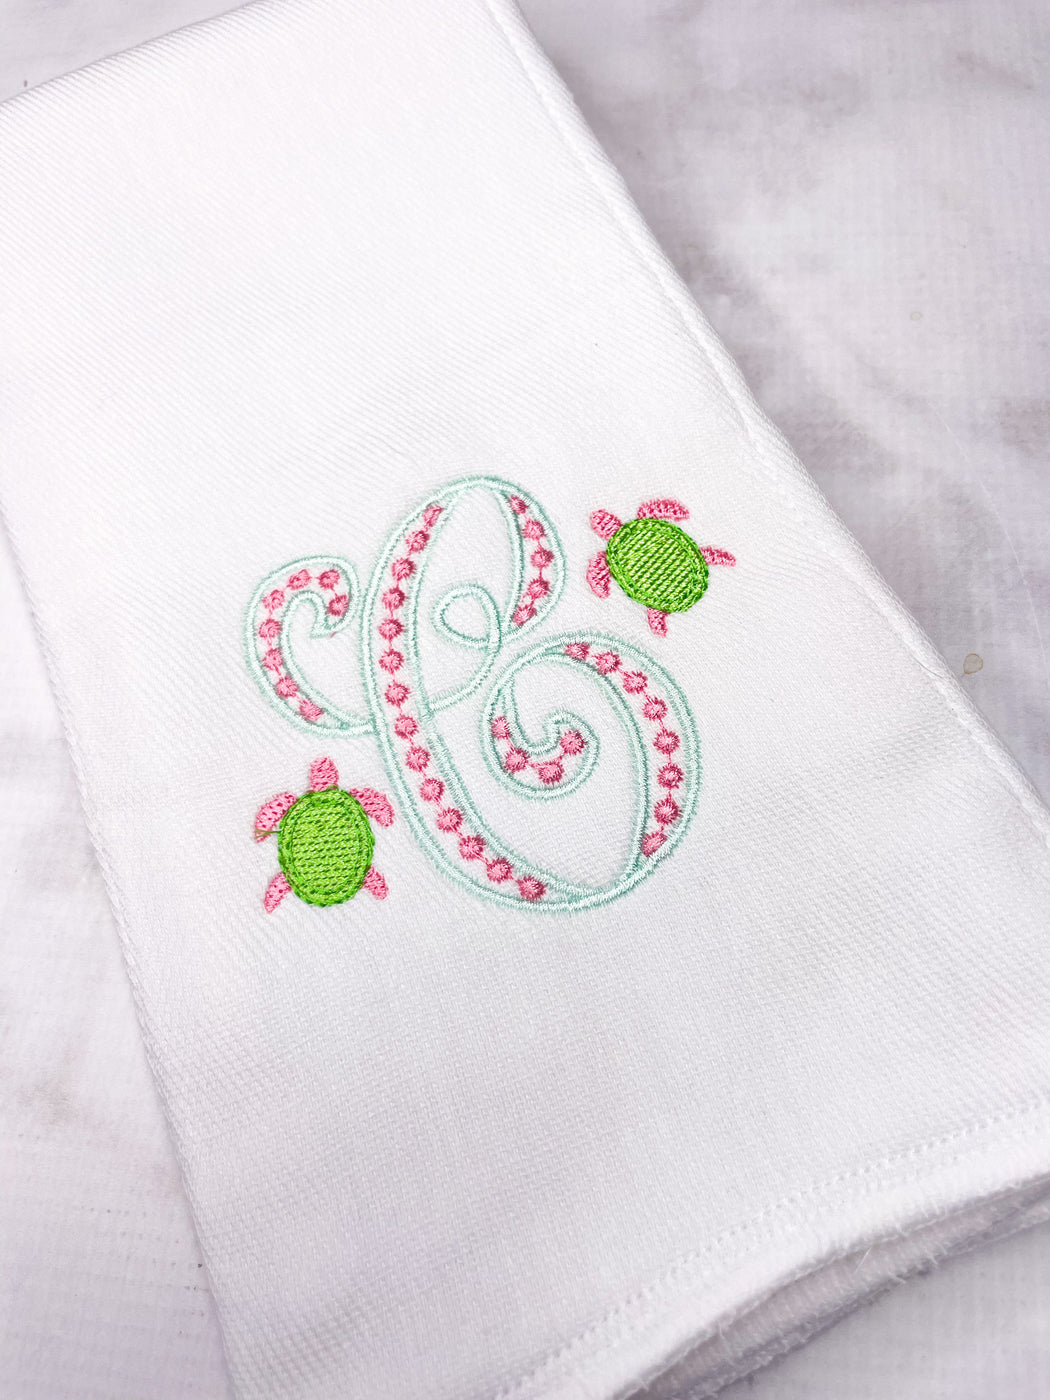 Baby Girl Personalized Monogrammed Burp Cloth Set of 2 - Sea Turtles